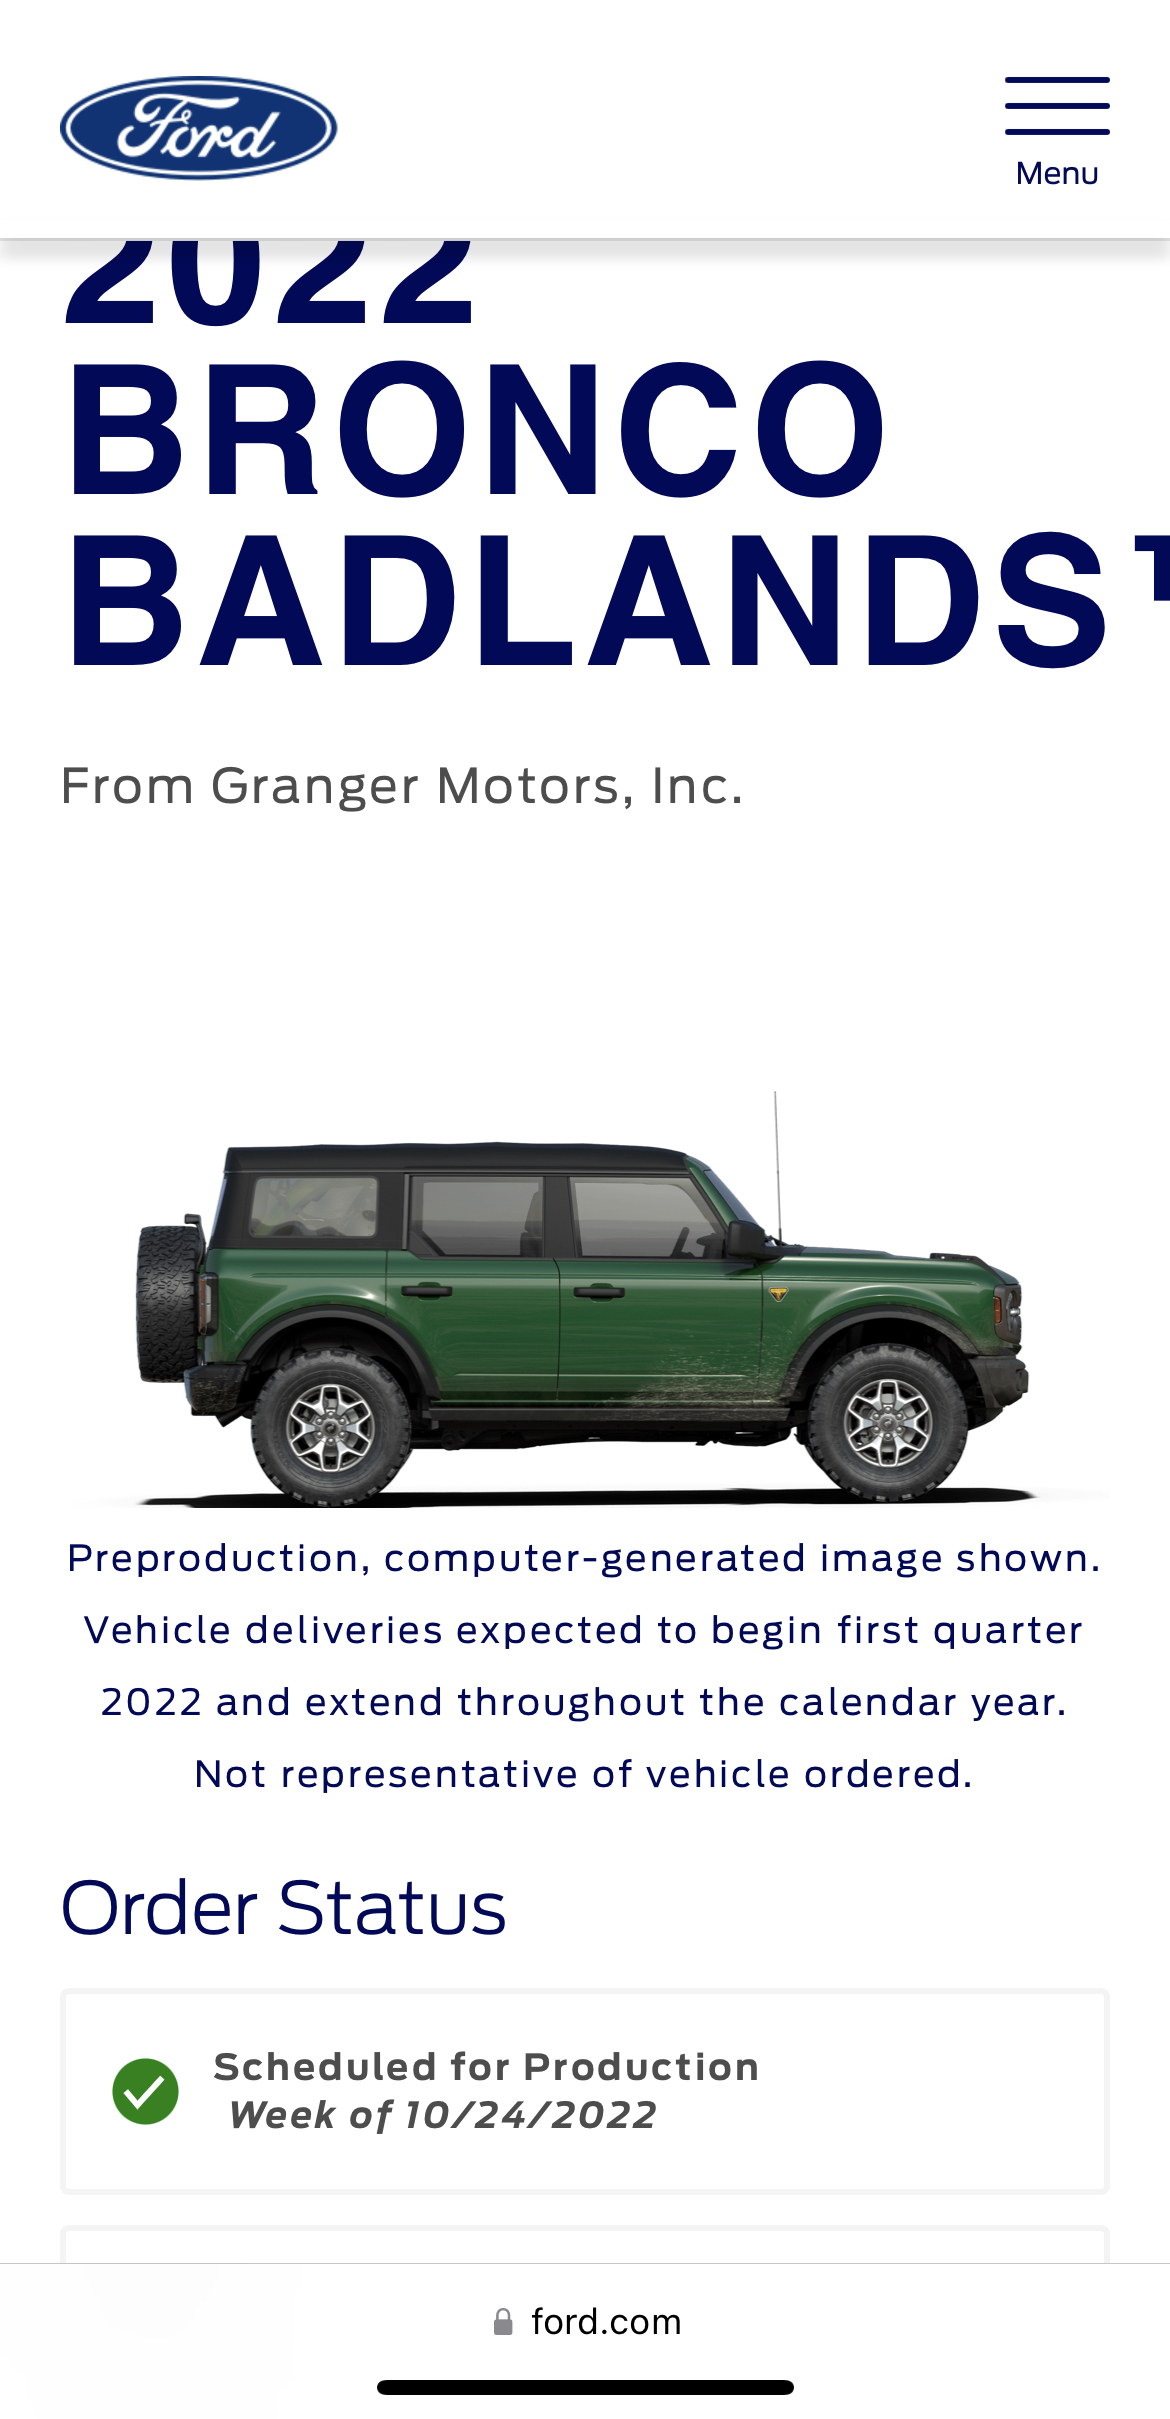 Ford Bronco Granger Ford July Update - Allocation for September Production, Current wait list, 2023 Speculation 77F01617-48D4-4A32-BC7F-3C07A3F8B2E7